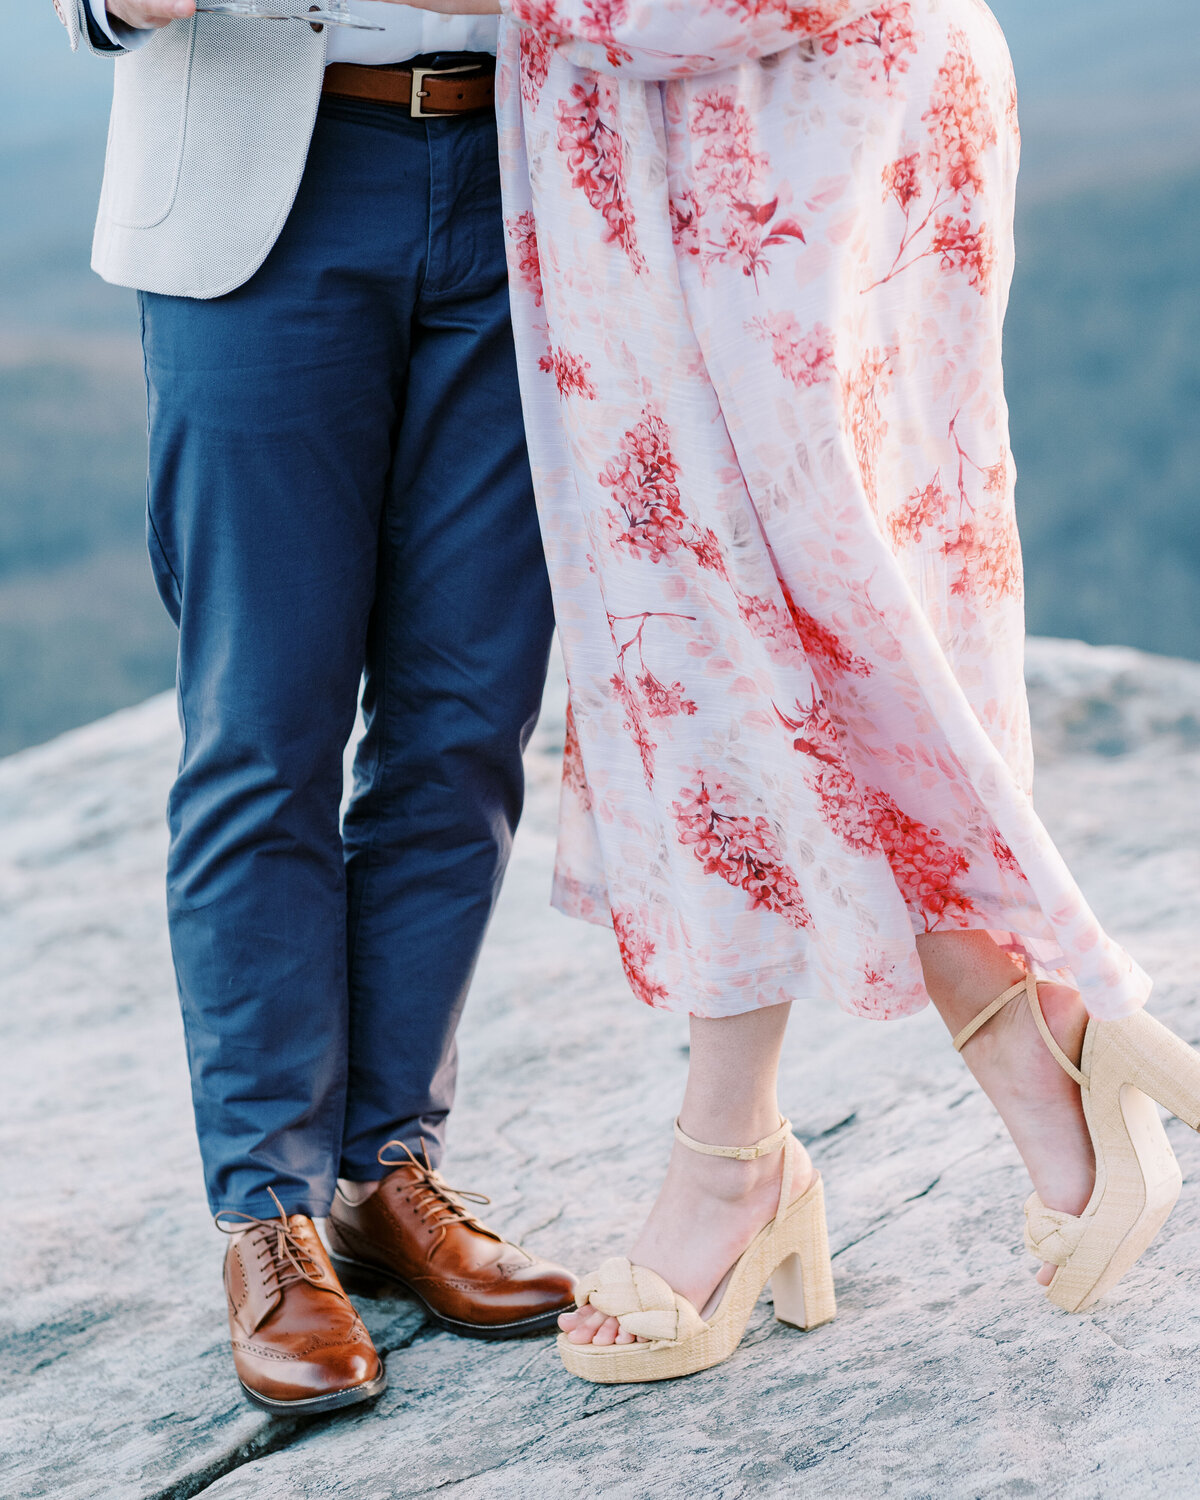 The Fourniers | Grandfather Mountain Engagement-132